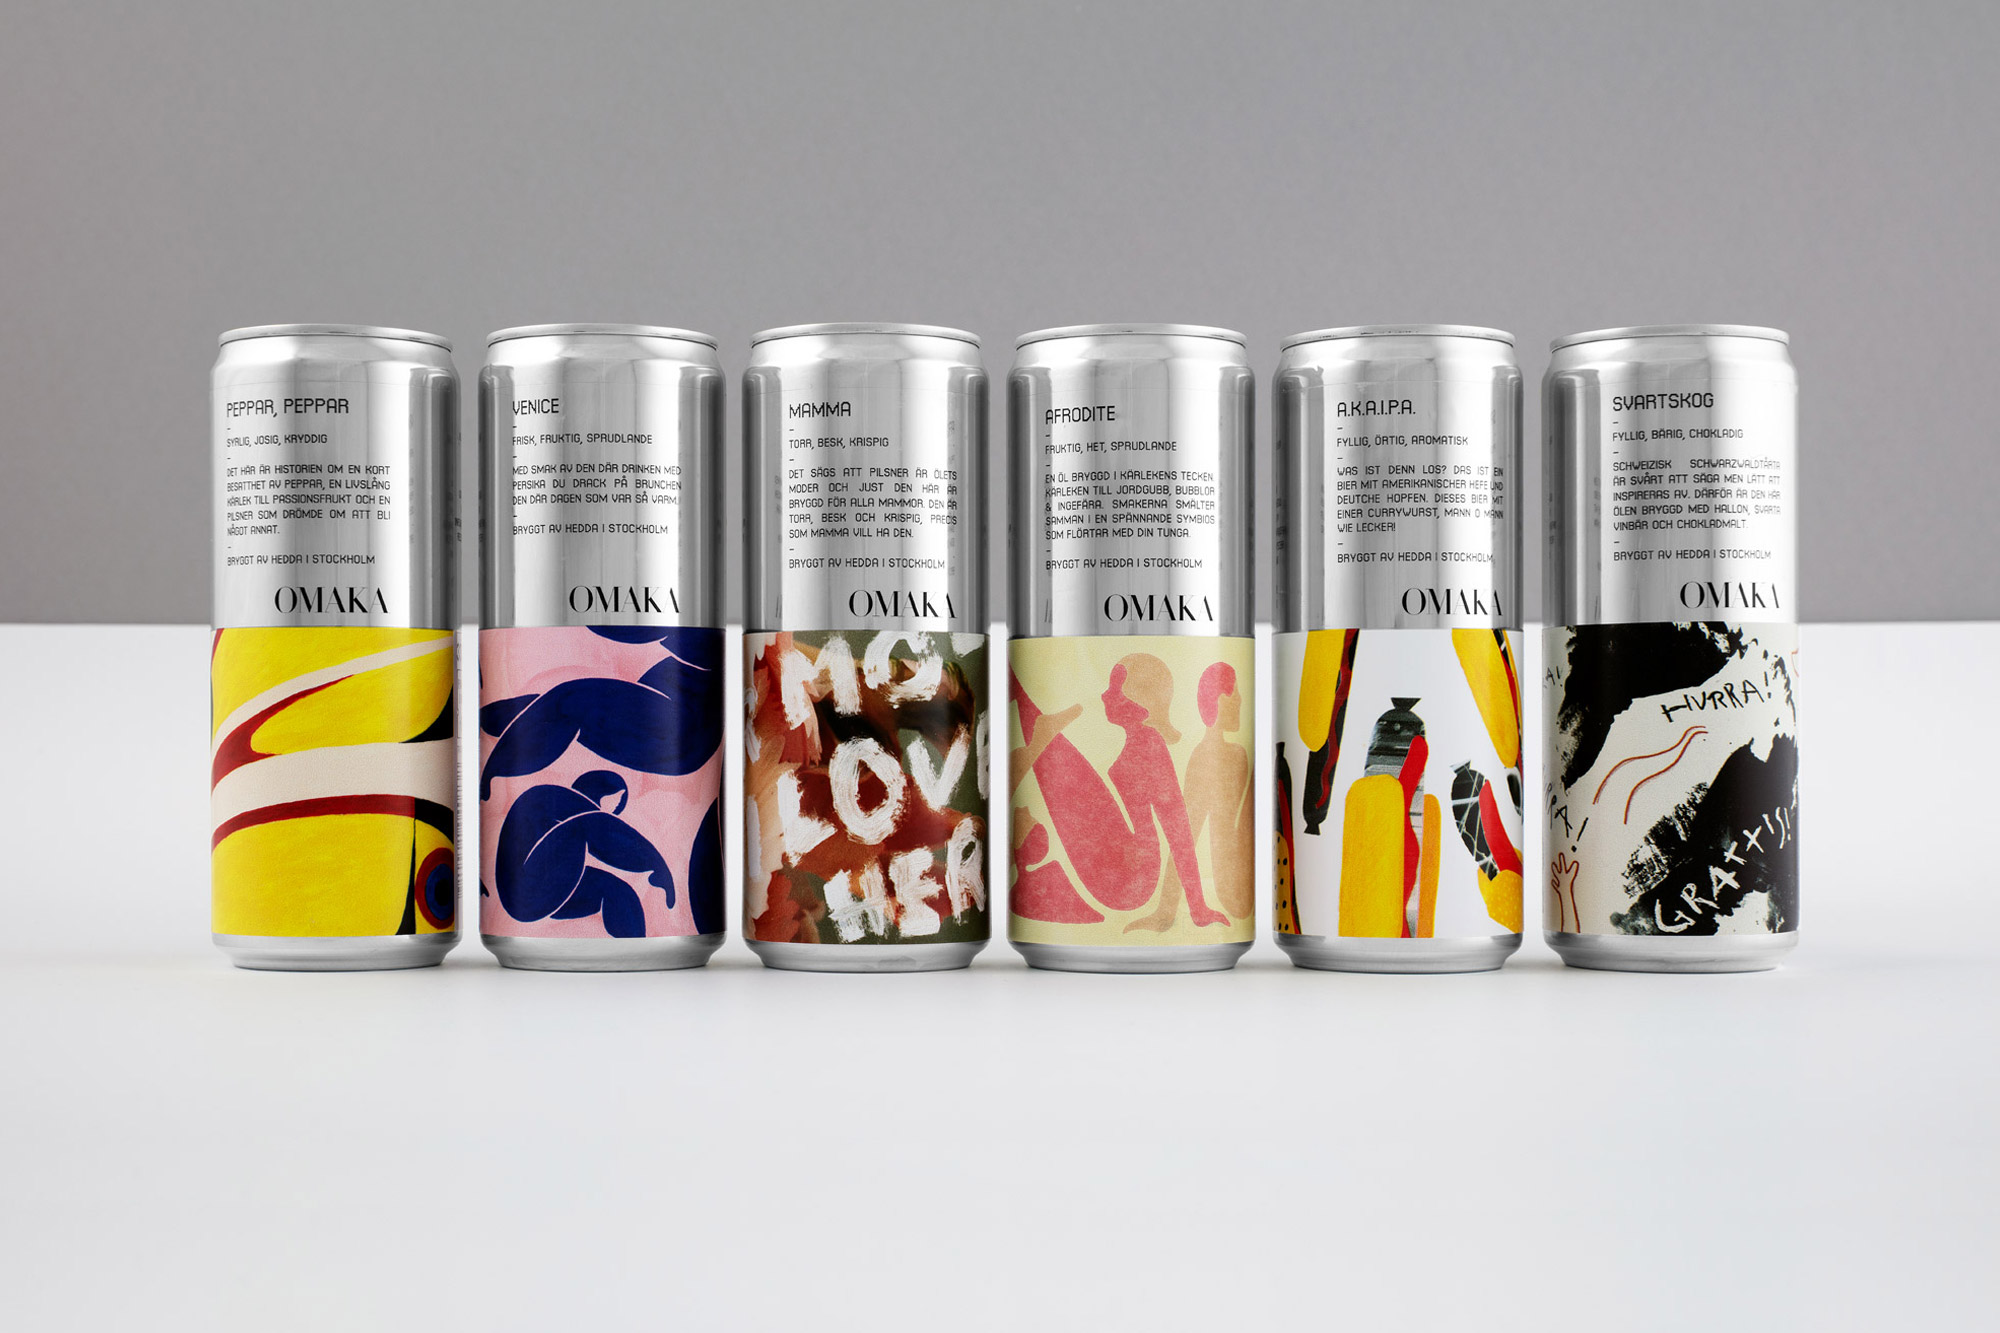 Logo, brand identity and packaging design for Swedish microbrewery Omaka by Stockholm Design Lab